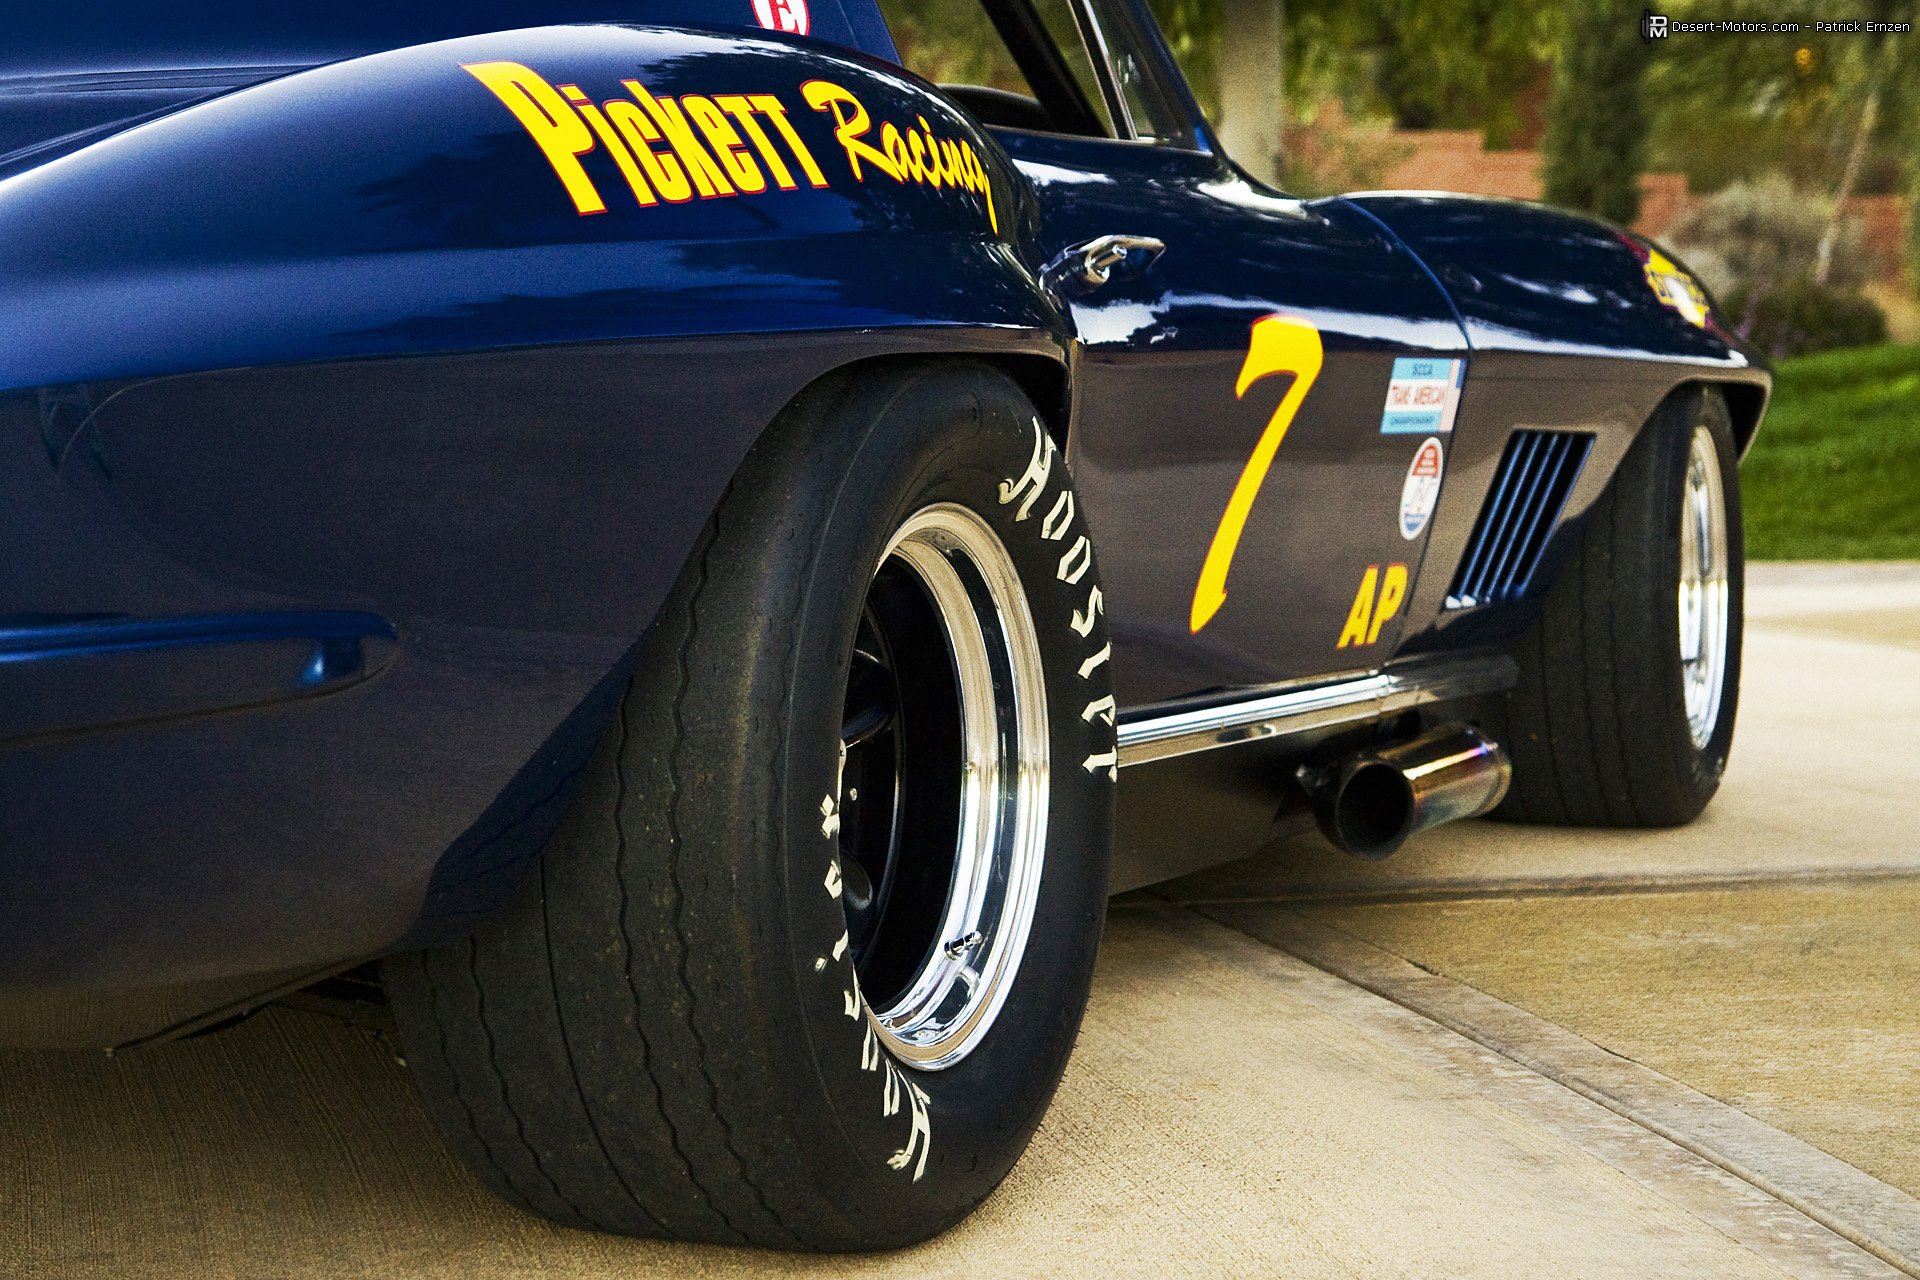 1967, Chevrolet, Corvette, 427, 435hp, Tri power, Coupe, Pickett, Race, Racing, Hot, Rod, Rods, Muscle, Supercar, Classic Wallpaper